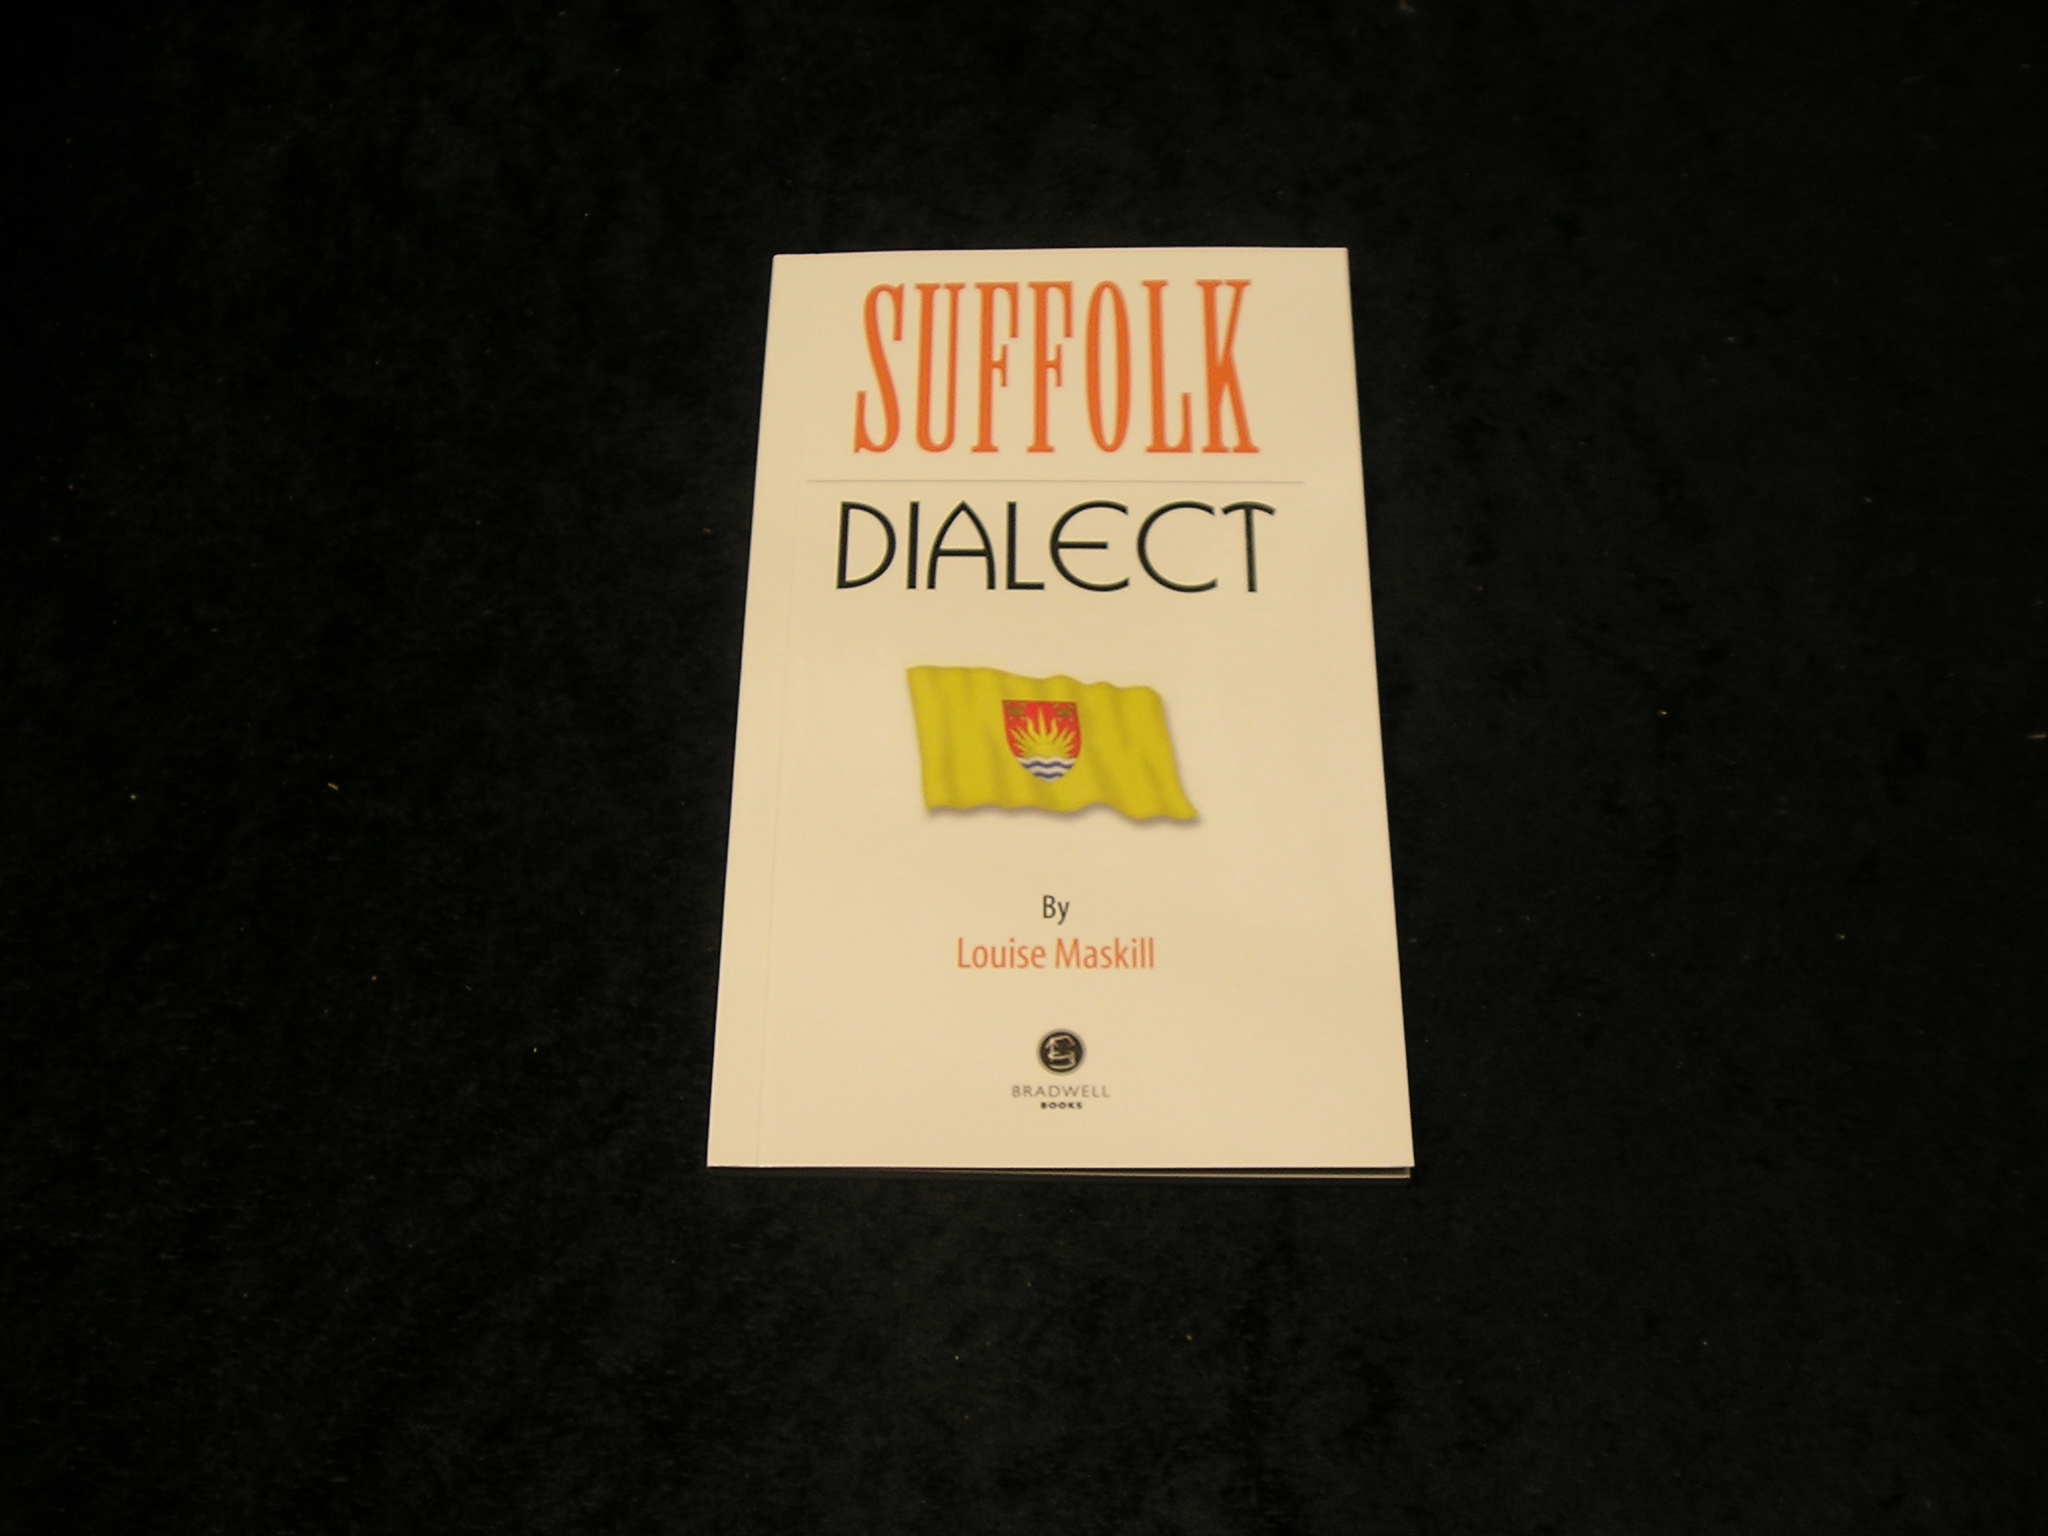 Suffolk Dialect